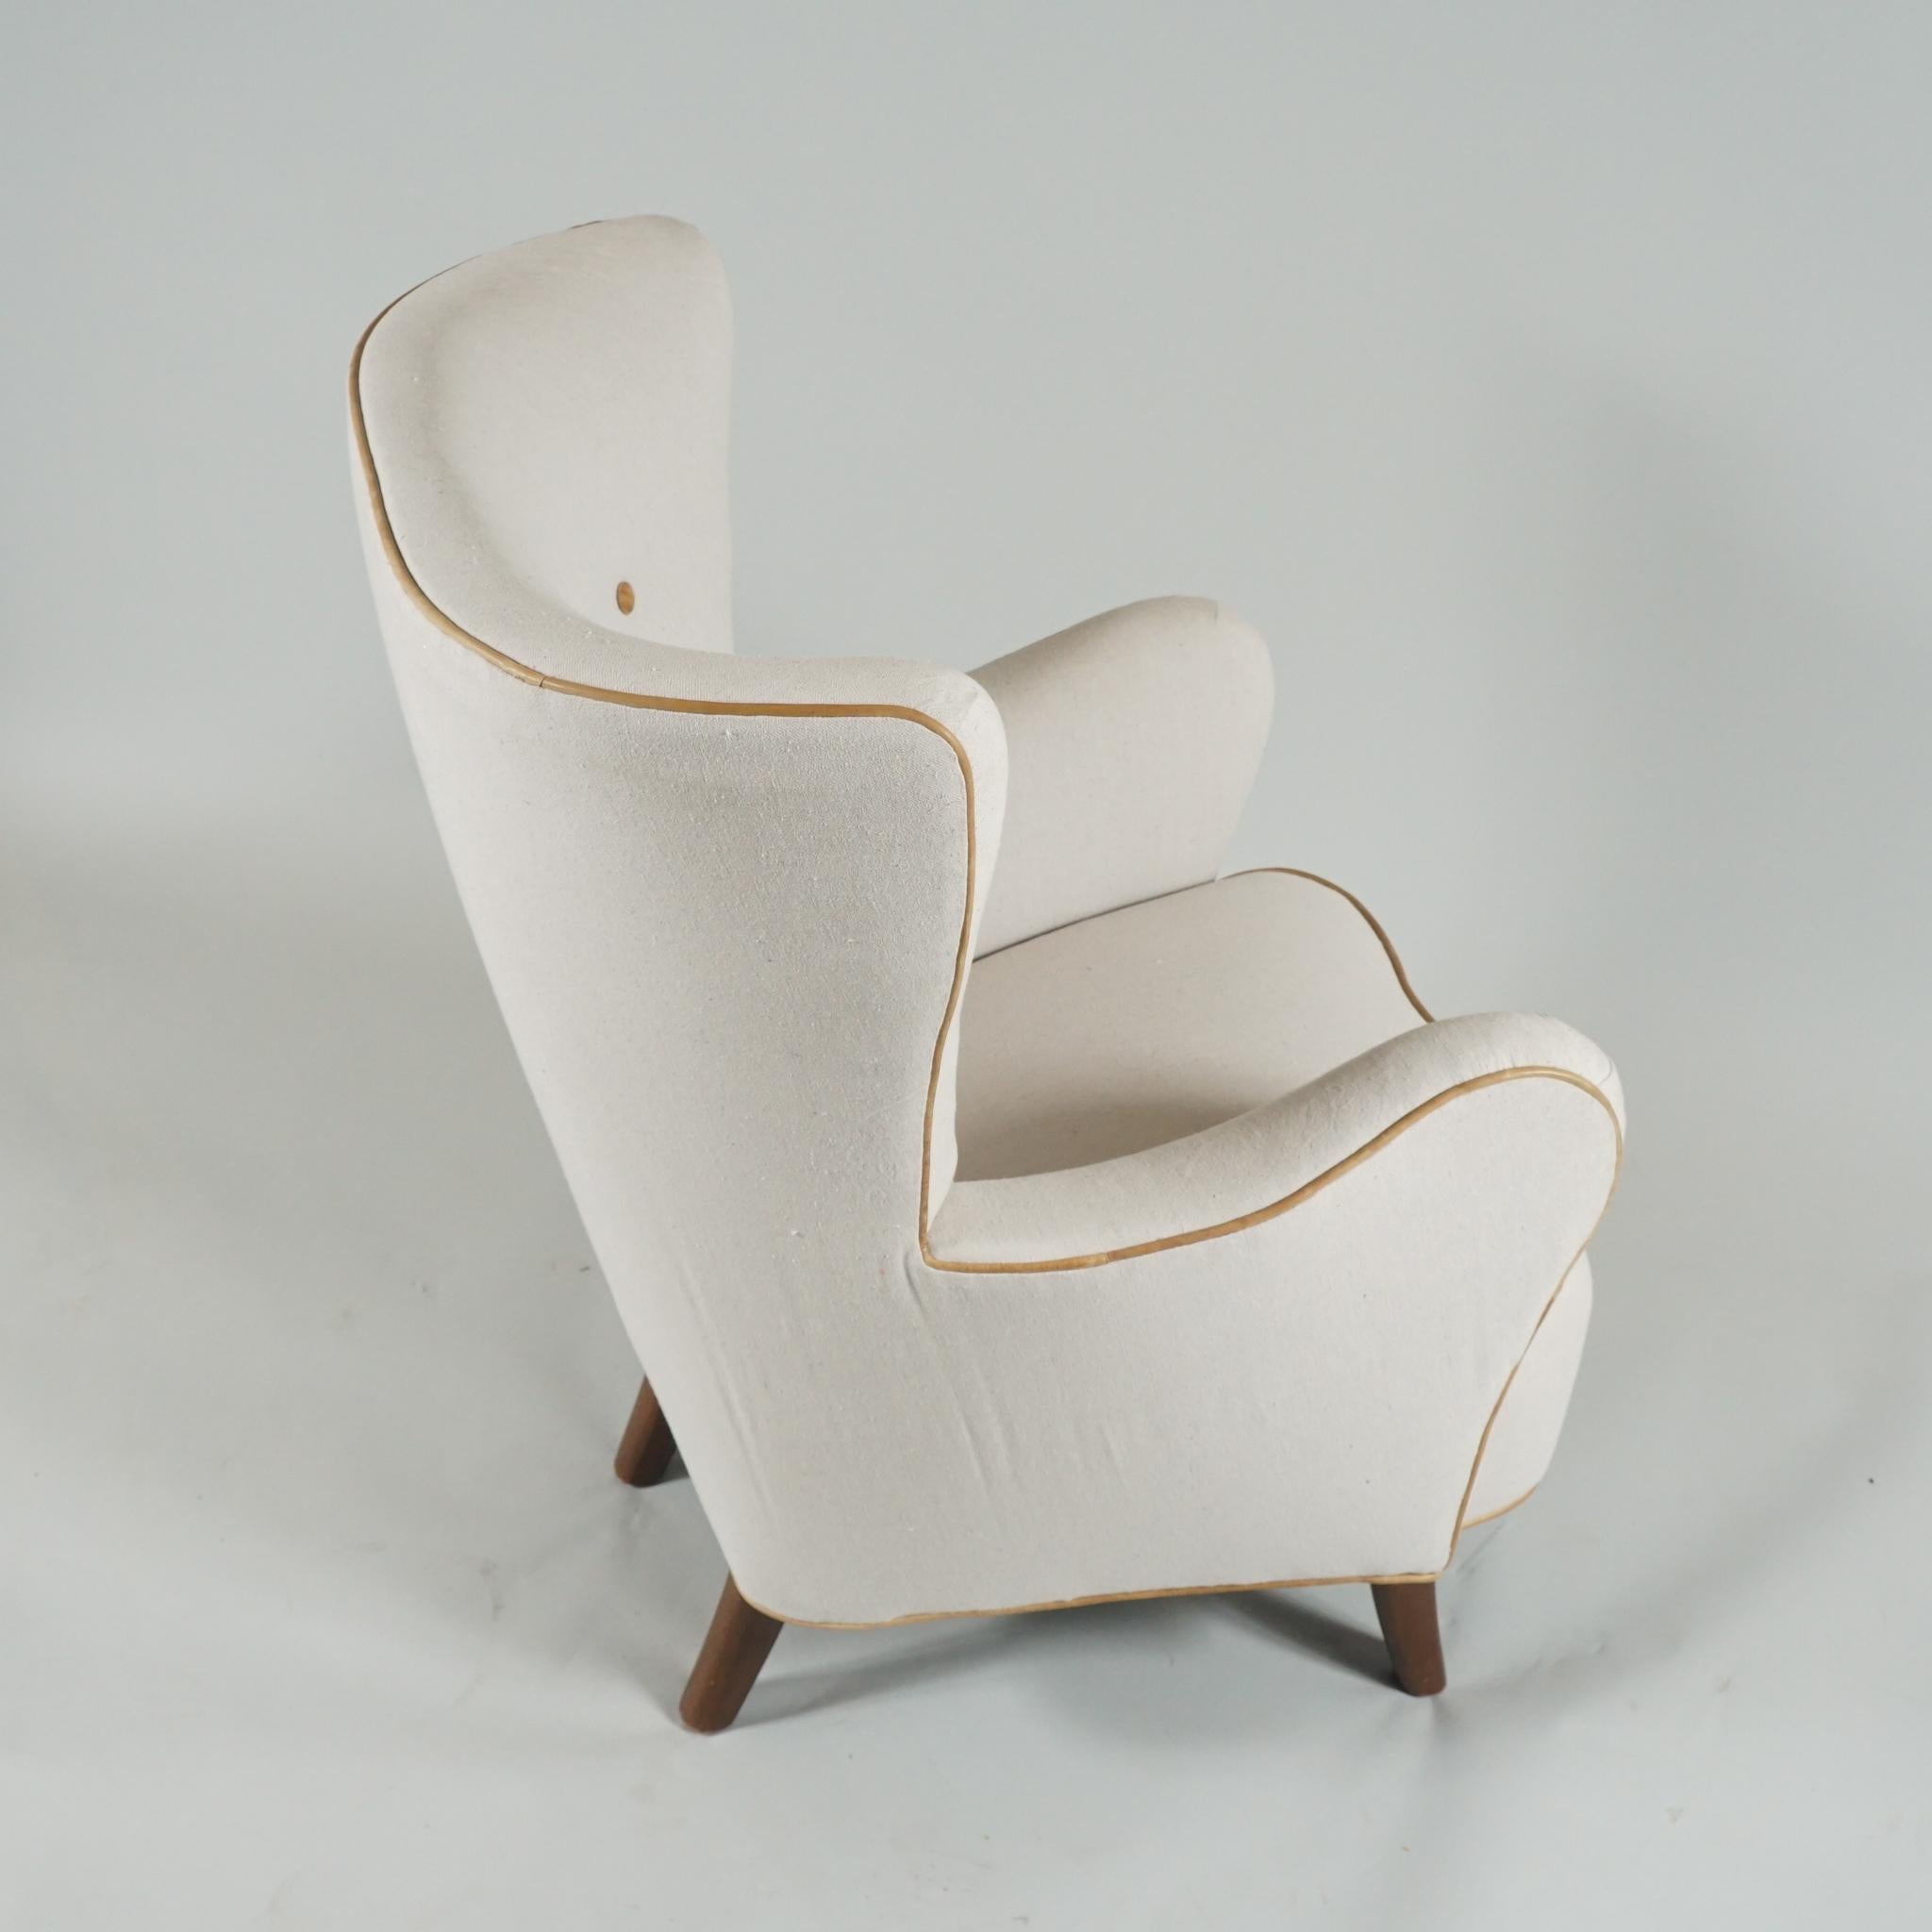 Hand-Crafted Lounge Chair by Alfred Christensen For Sale